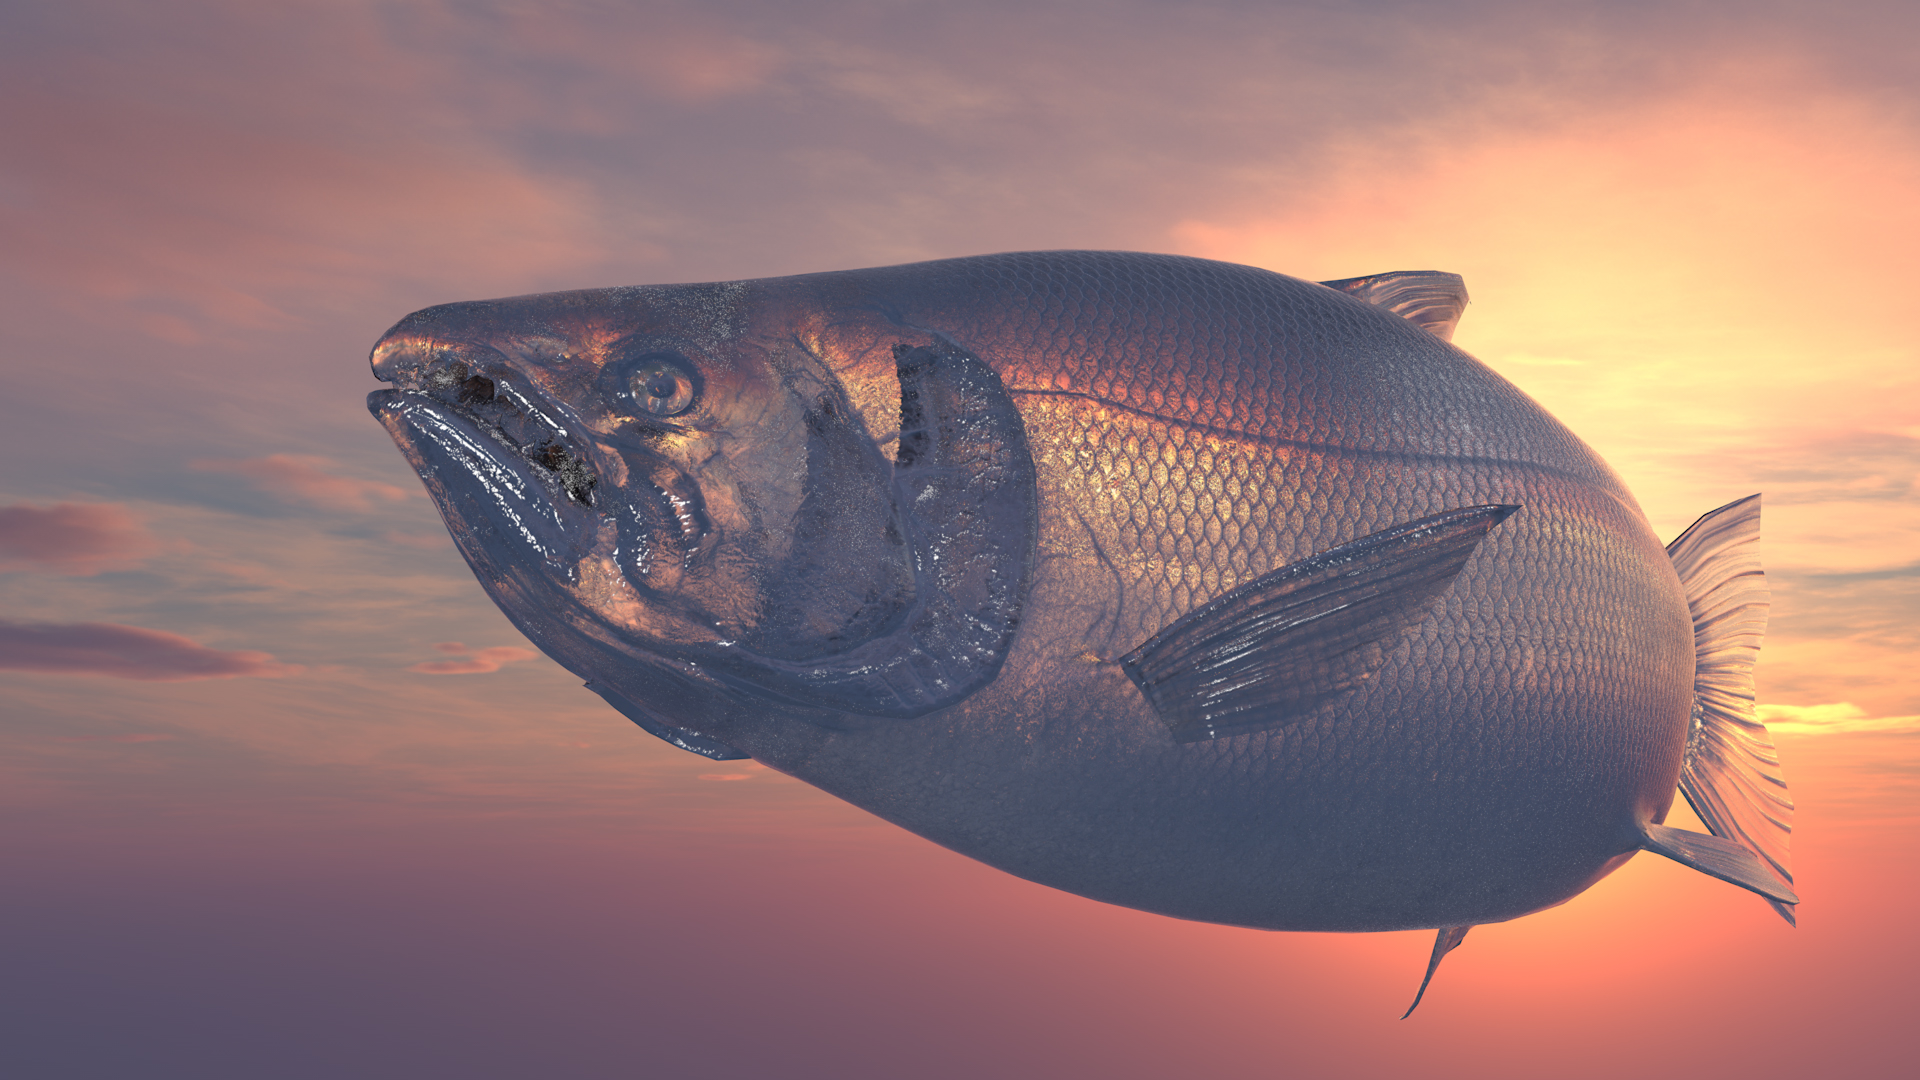 A digitally rendered, semi-transparent fish appears suspended in a pastel-coloured sky in sunset.